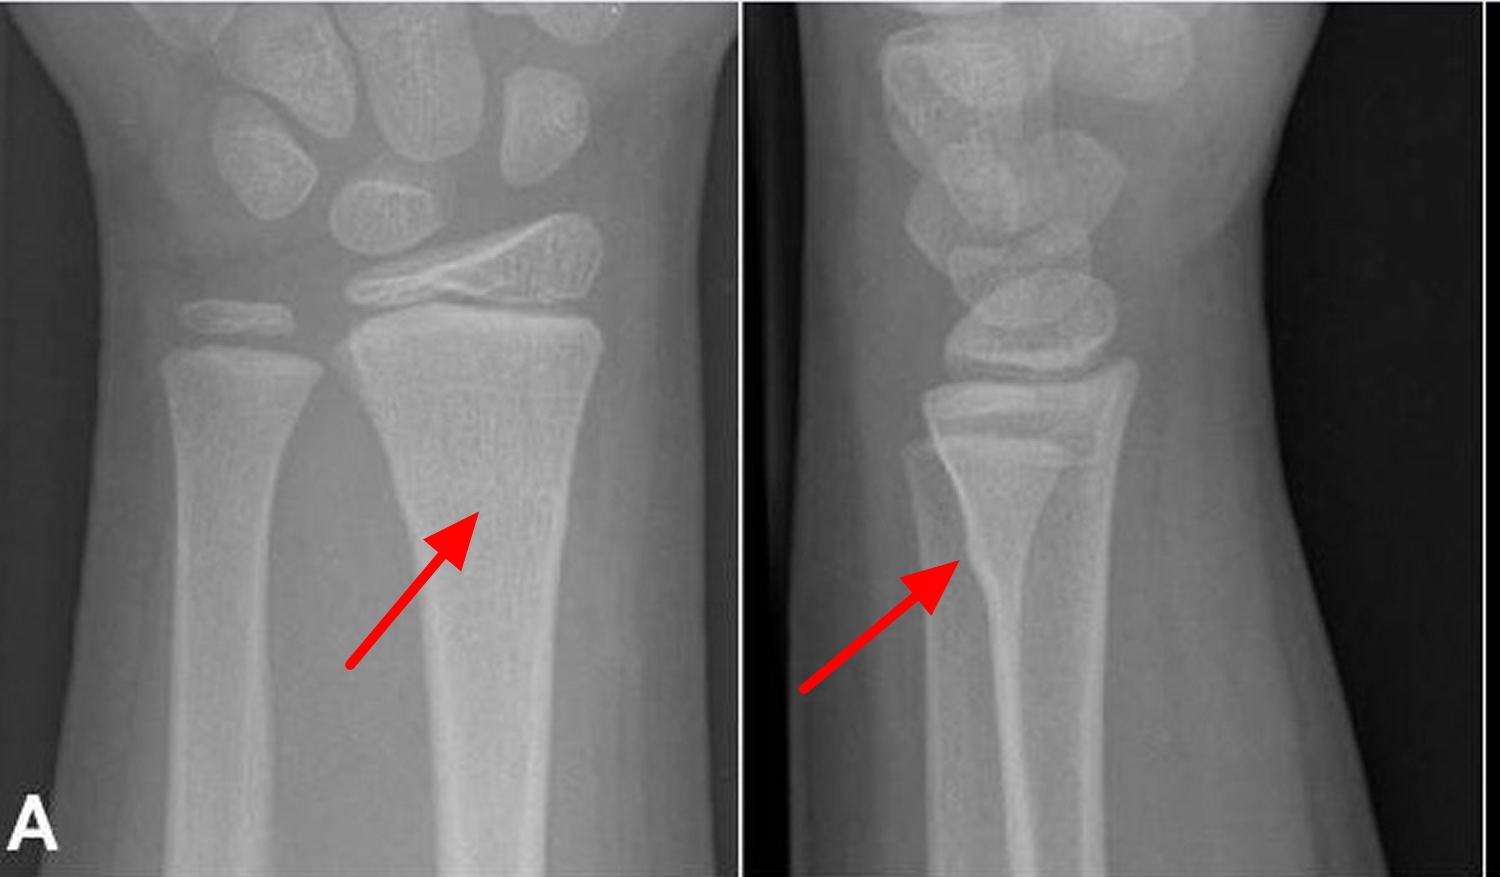 Fracture - Causes, Healing Time, Treatment